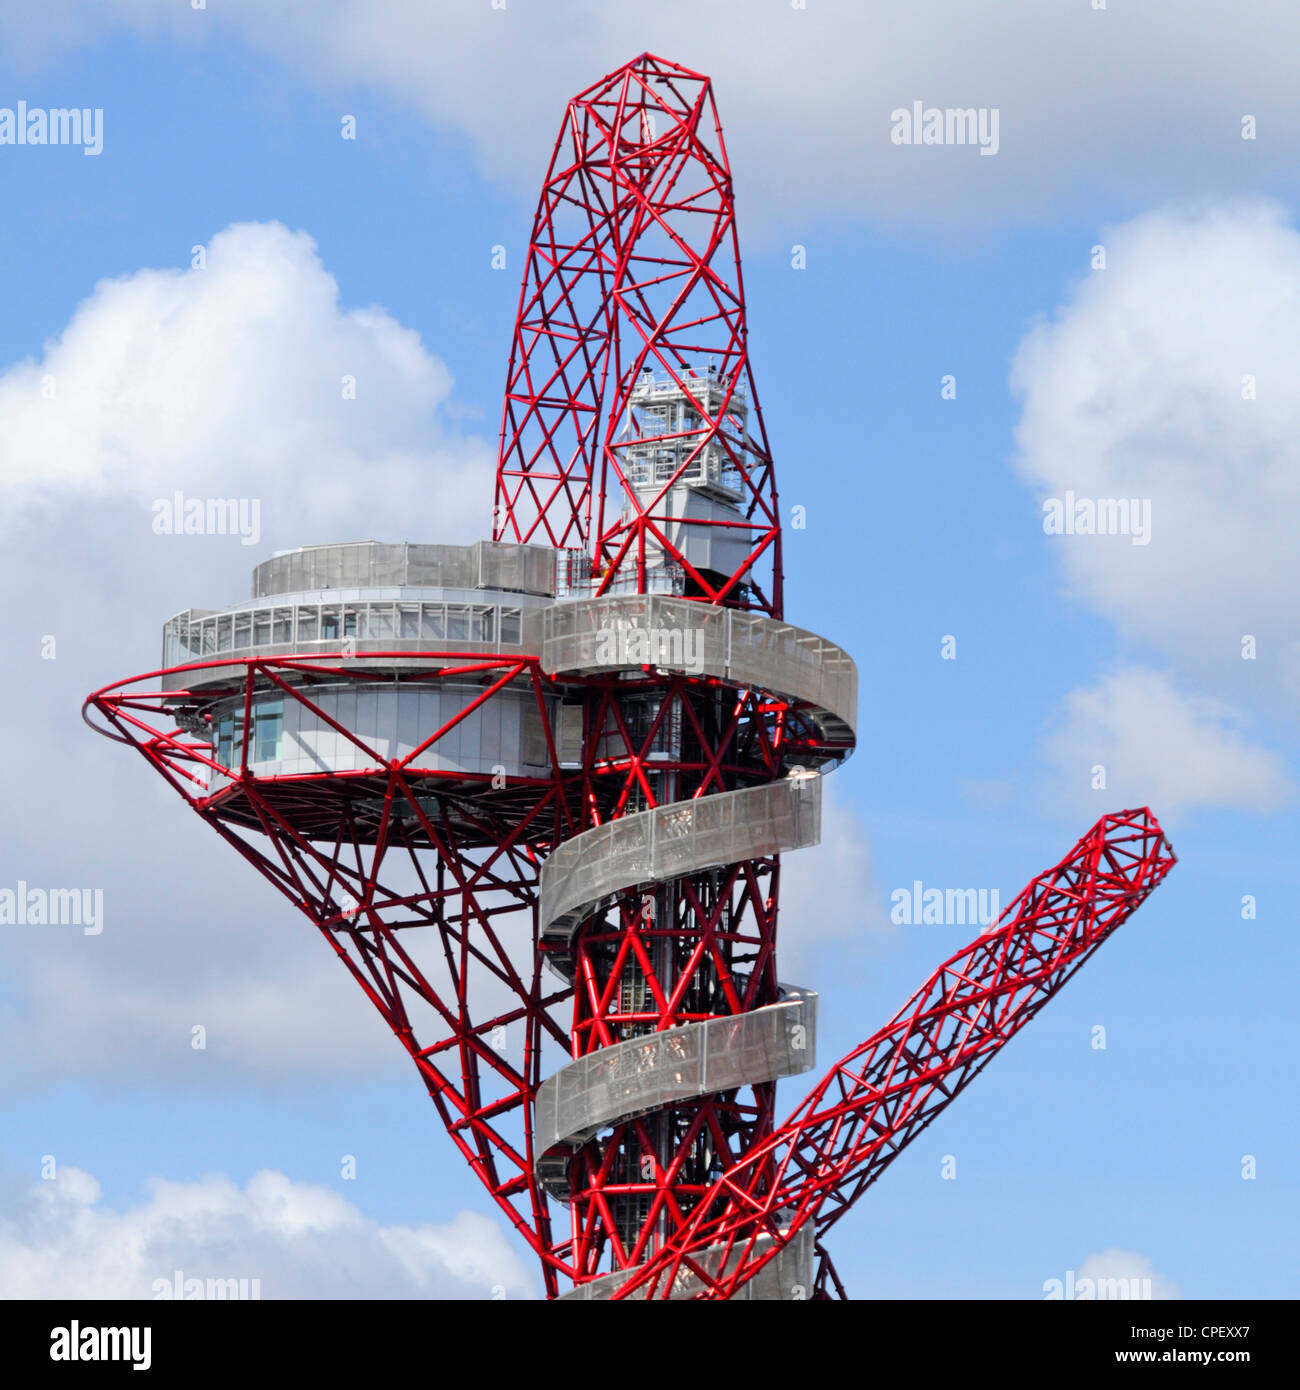 Close up of Public Art sculpture known as Arcelormittal Orbit Tower & observation deck for Olympic park London 2012 Olympics Stratford East London UK Stock Photo